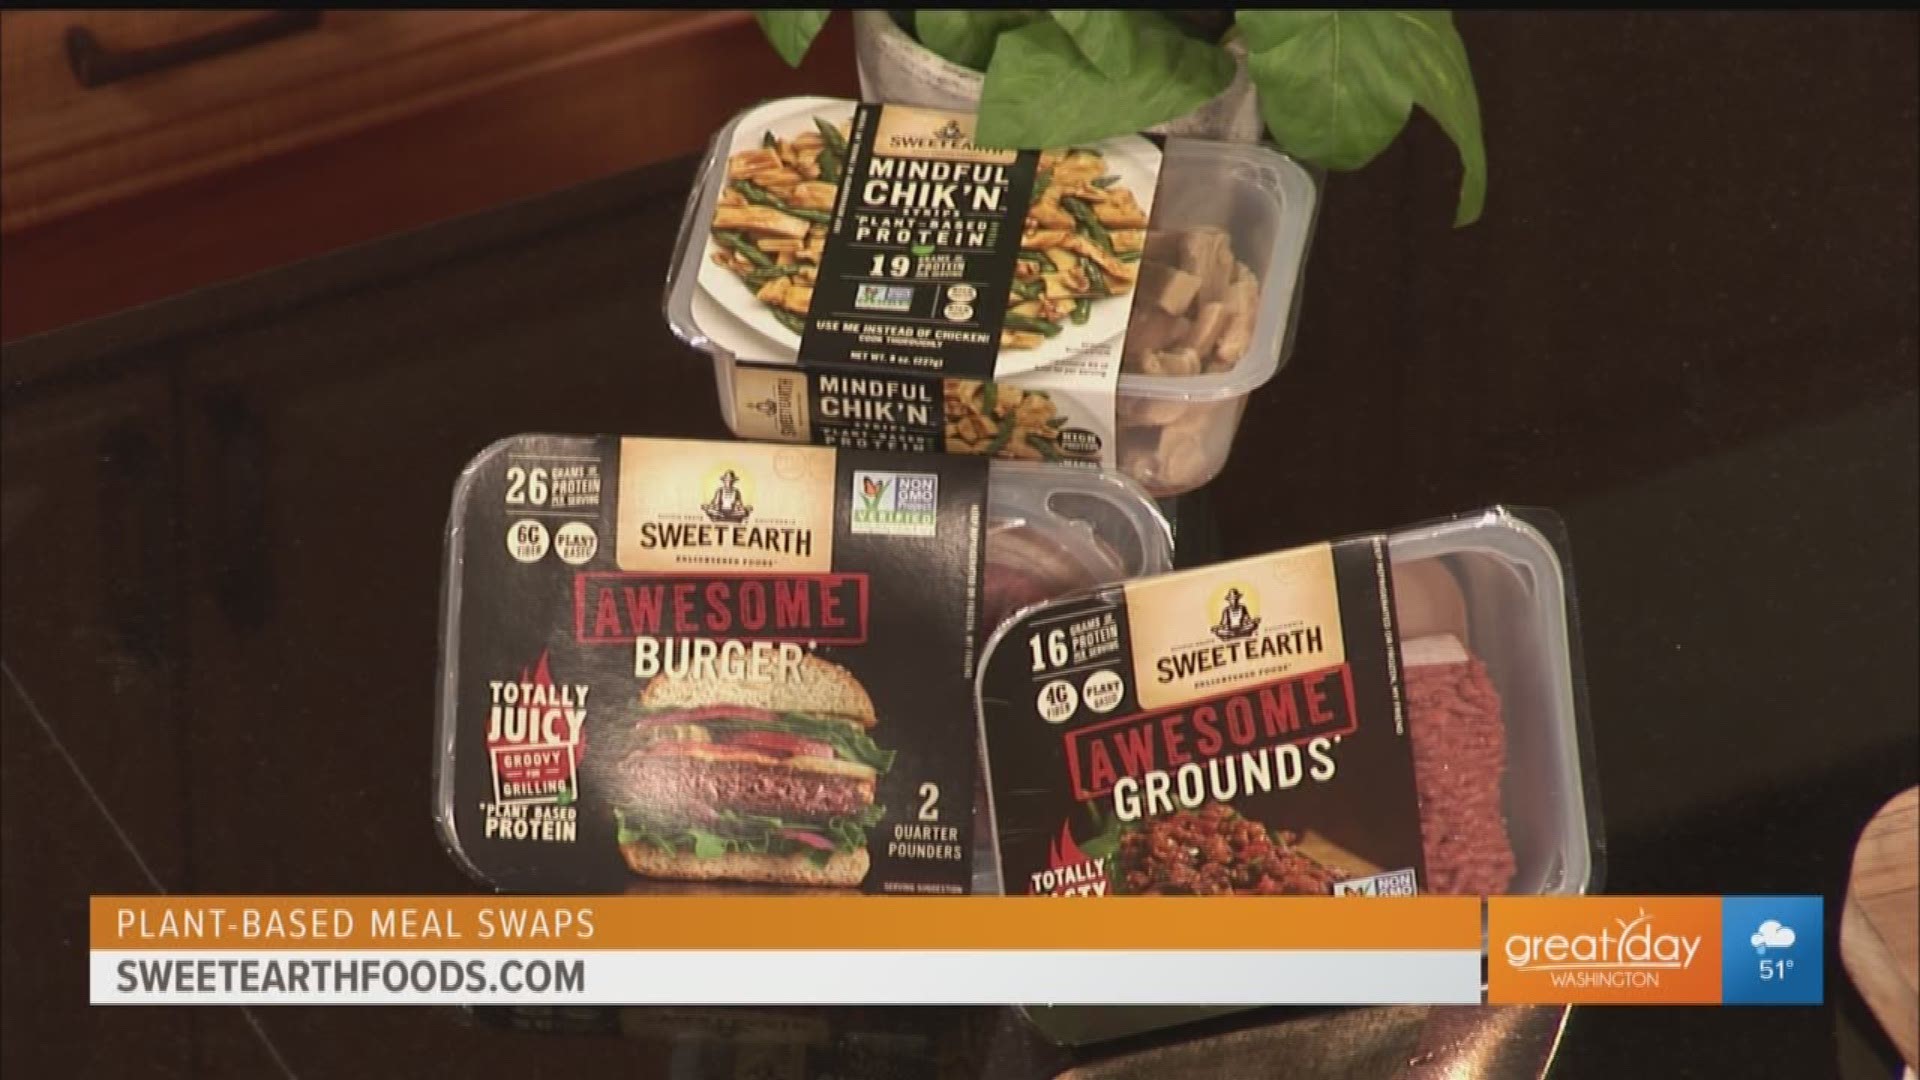 Sponsored by Sweet Earth Foods. Dietitian Charlene Thomas gives her tips for ways to swap out for plant-based foods.